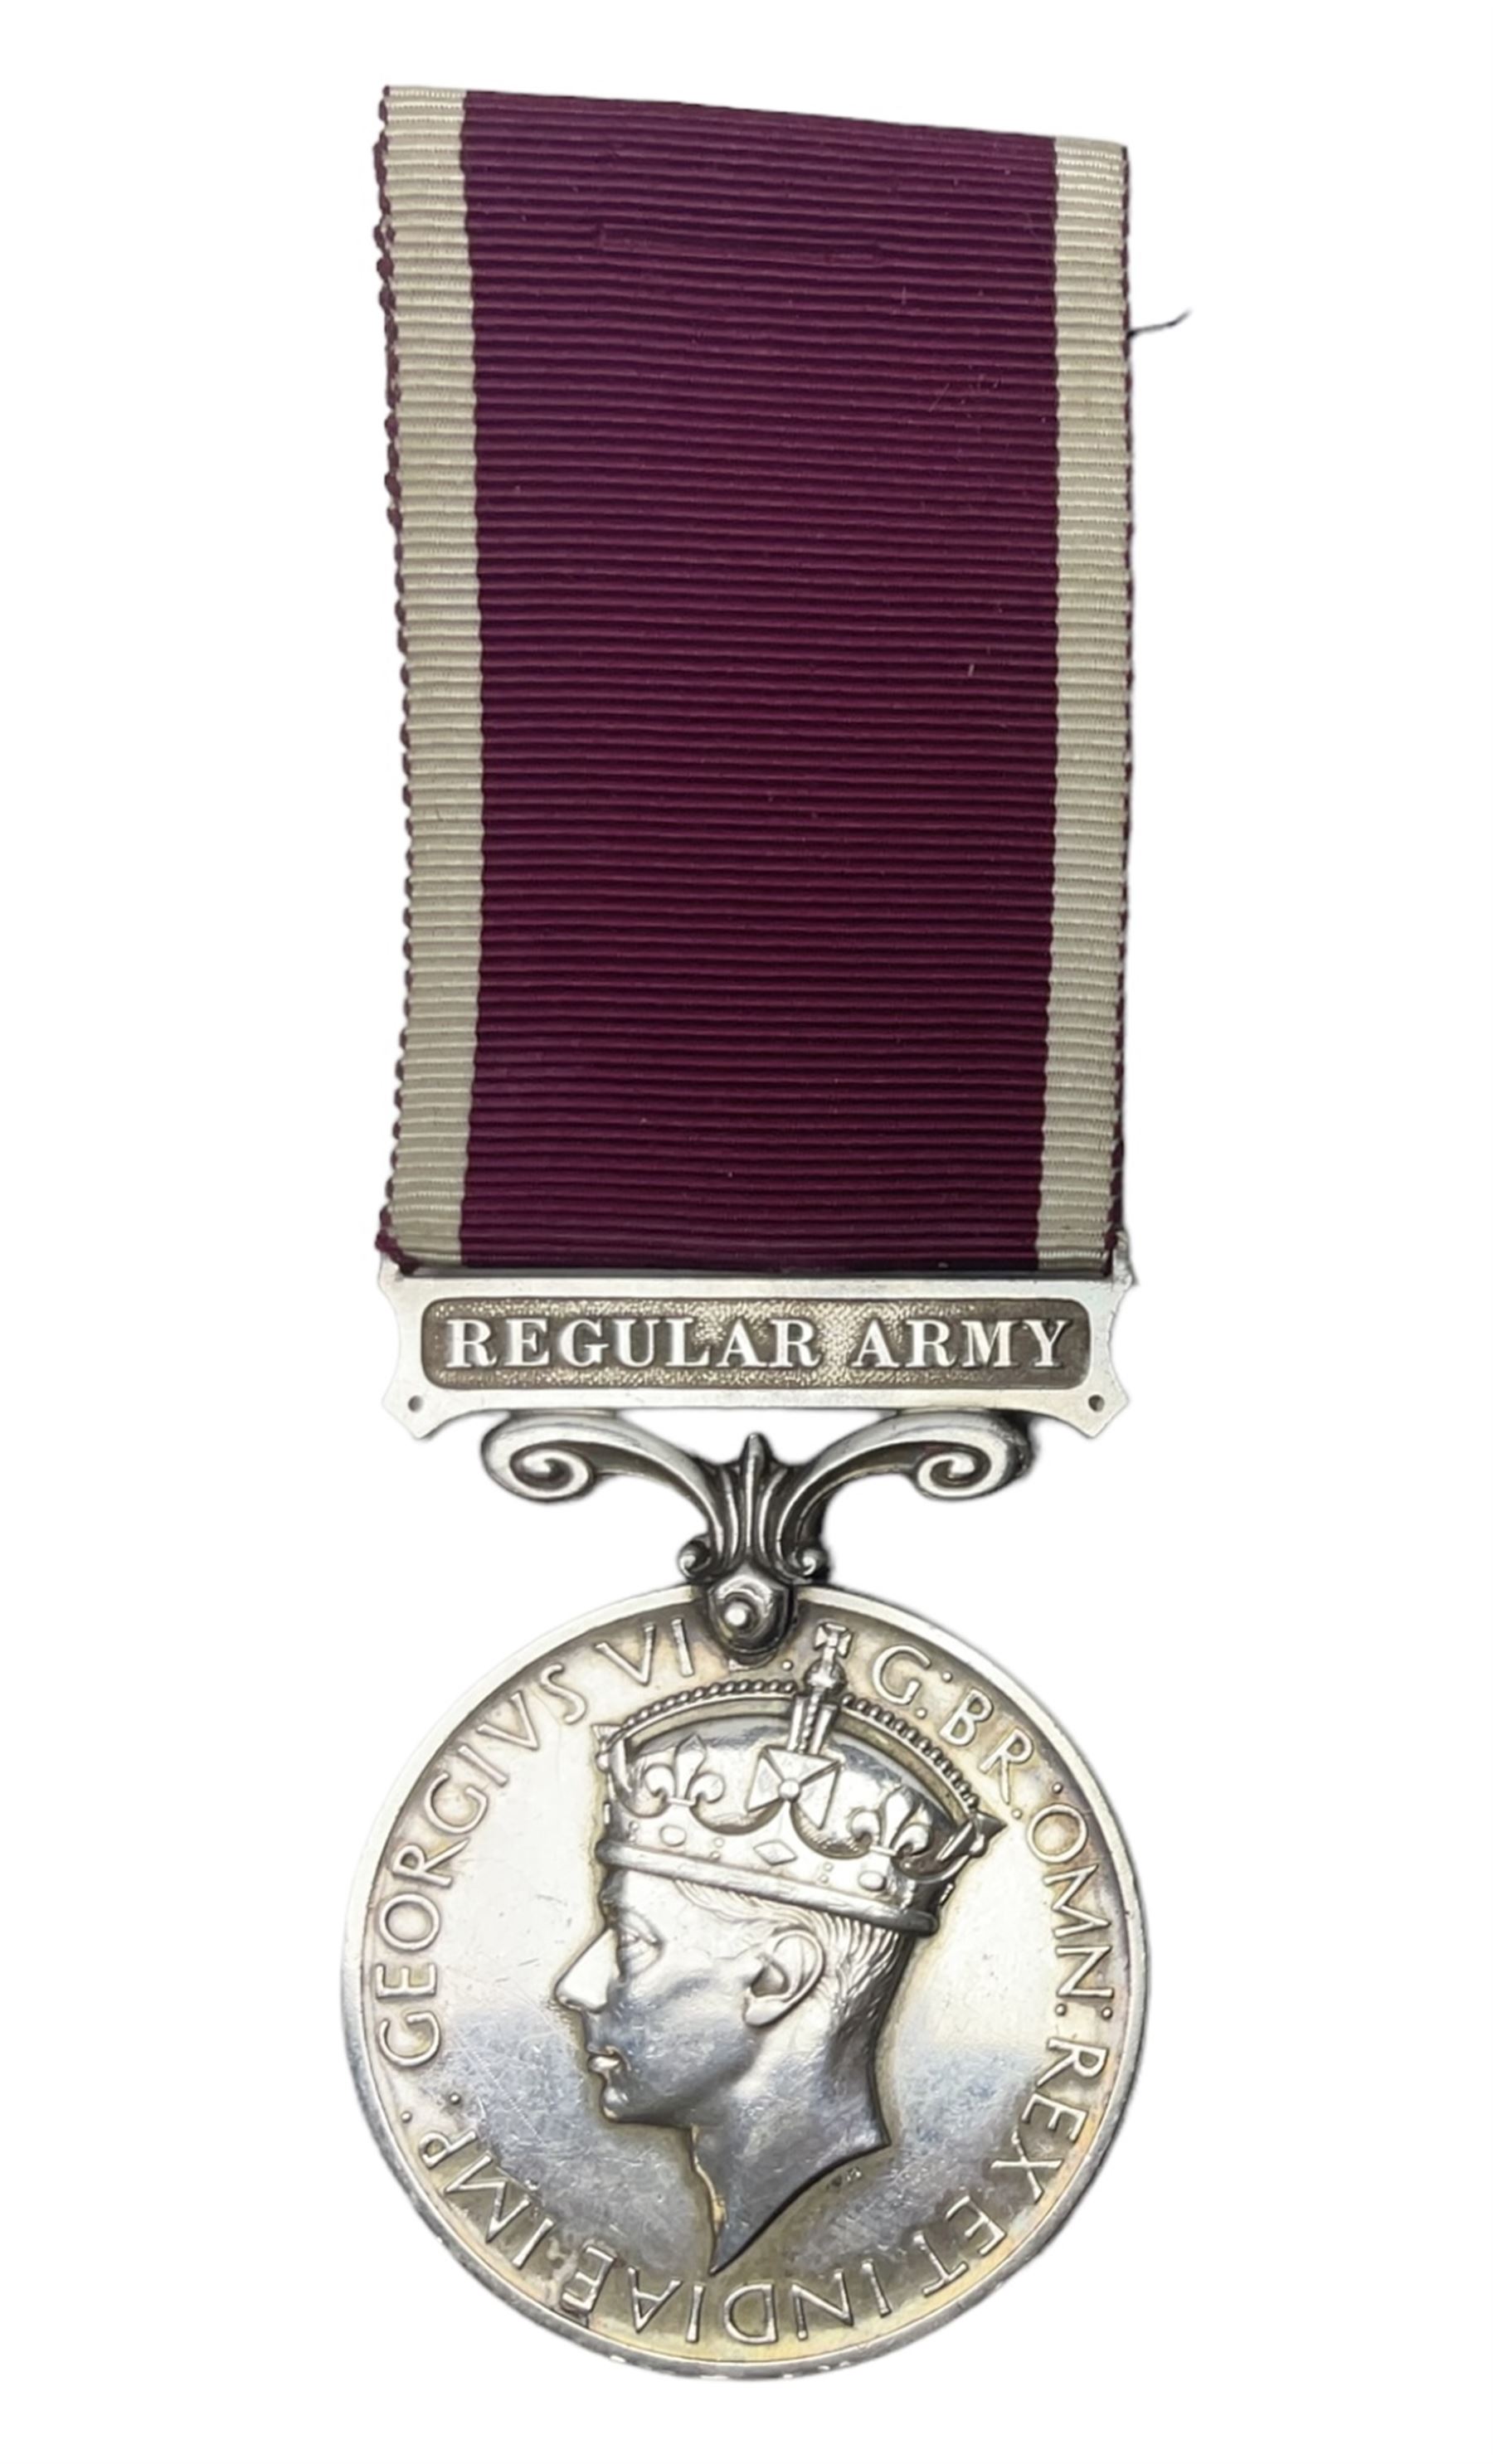 George VI Long Service and Good Conduct Medal with 'Regular Army' suspender awarded to Lieut. J. Rei